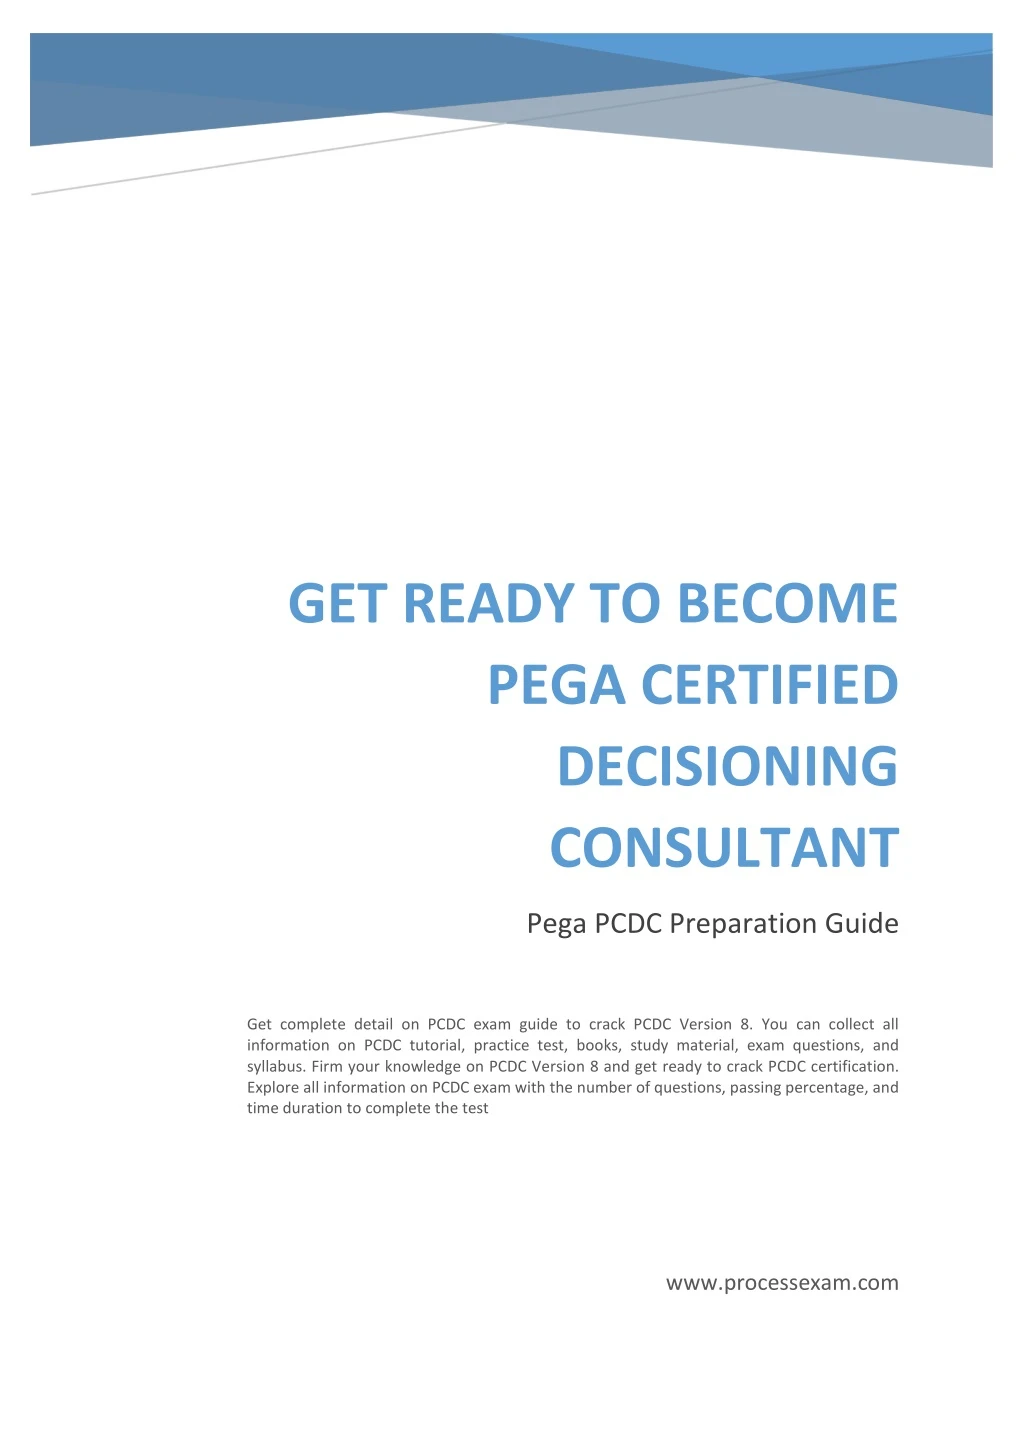 get ready to become pega certified decisioning